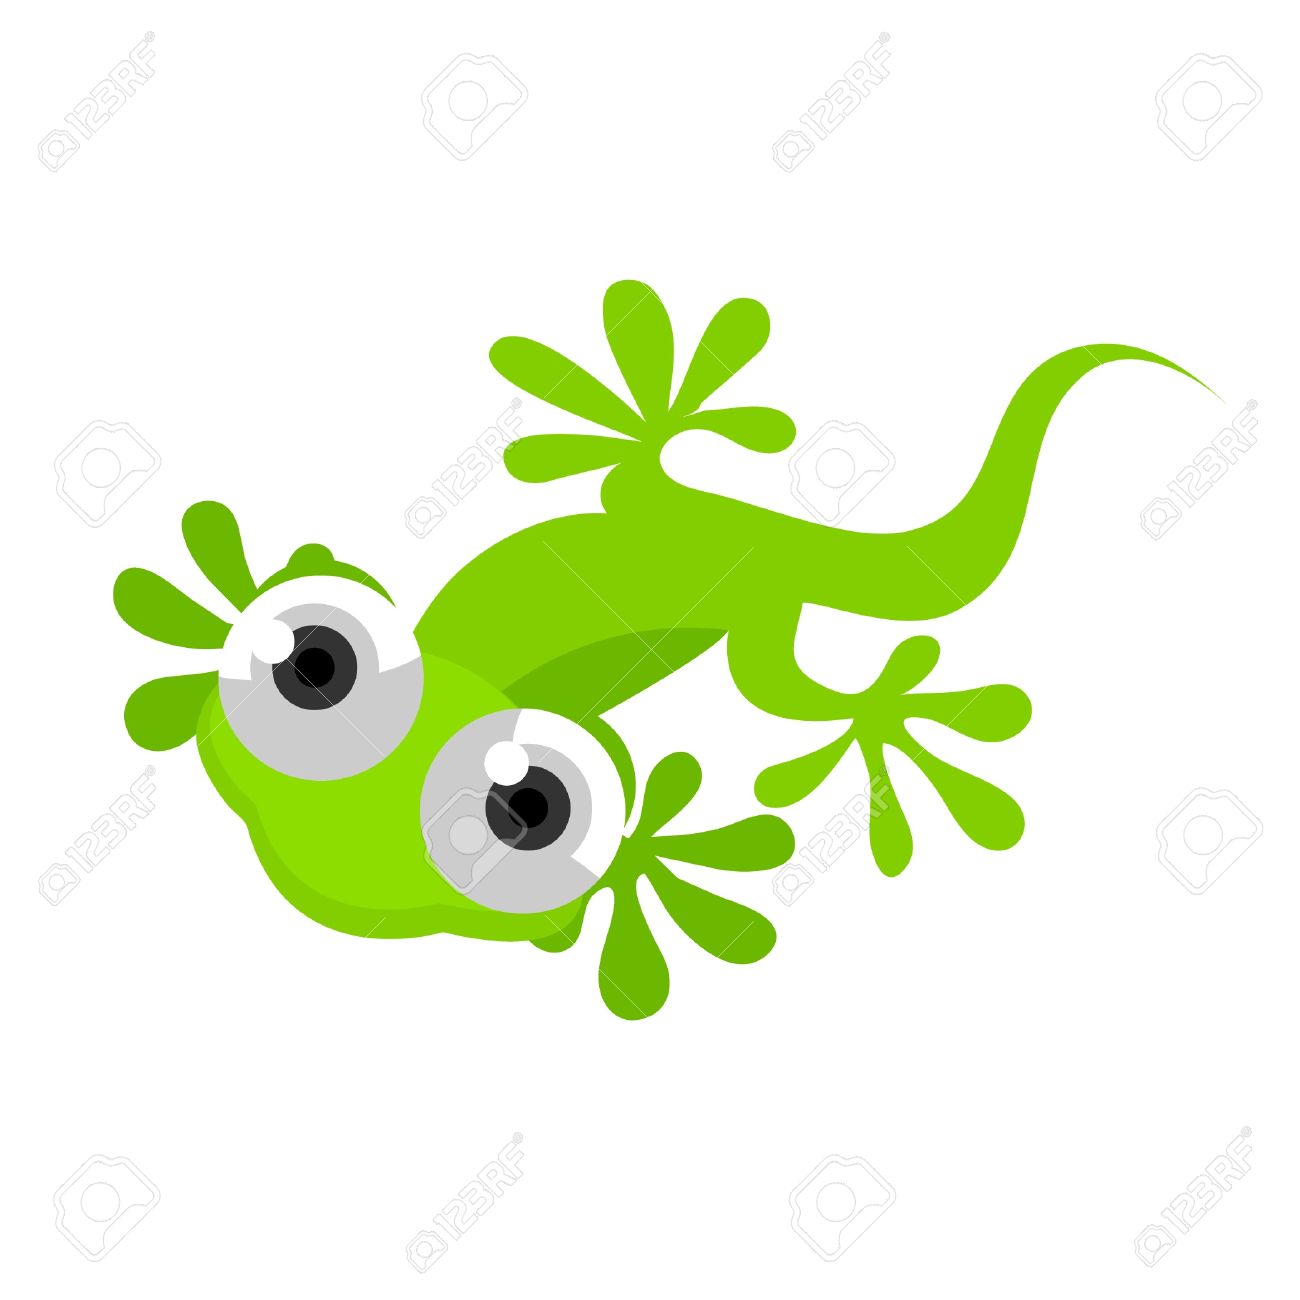 Gecko clipart #16, Download drawings